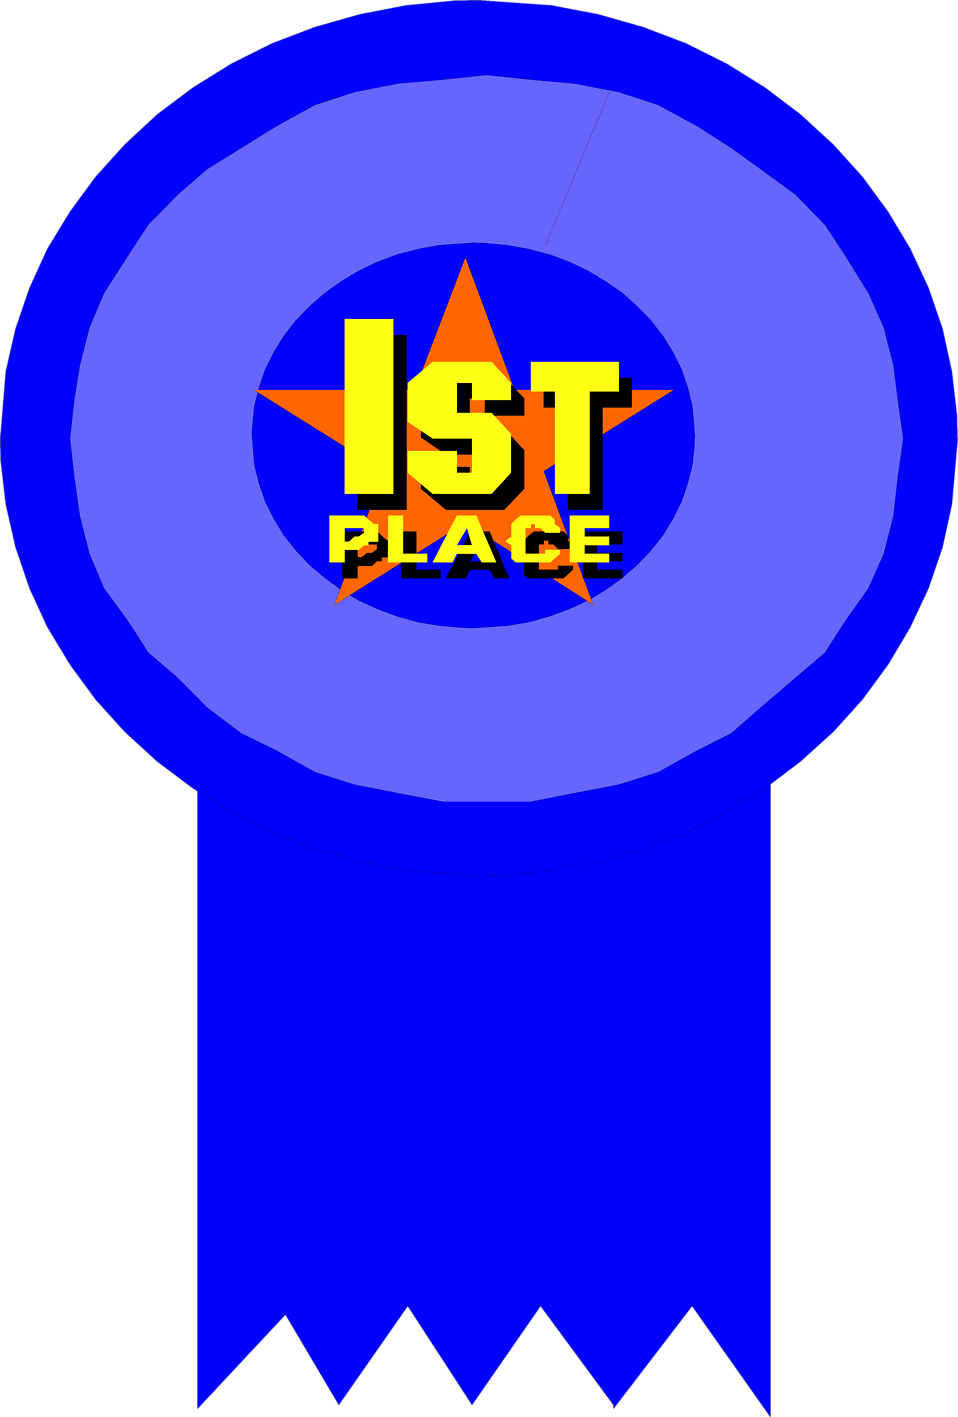 First Place Ribbon Clipart